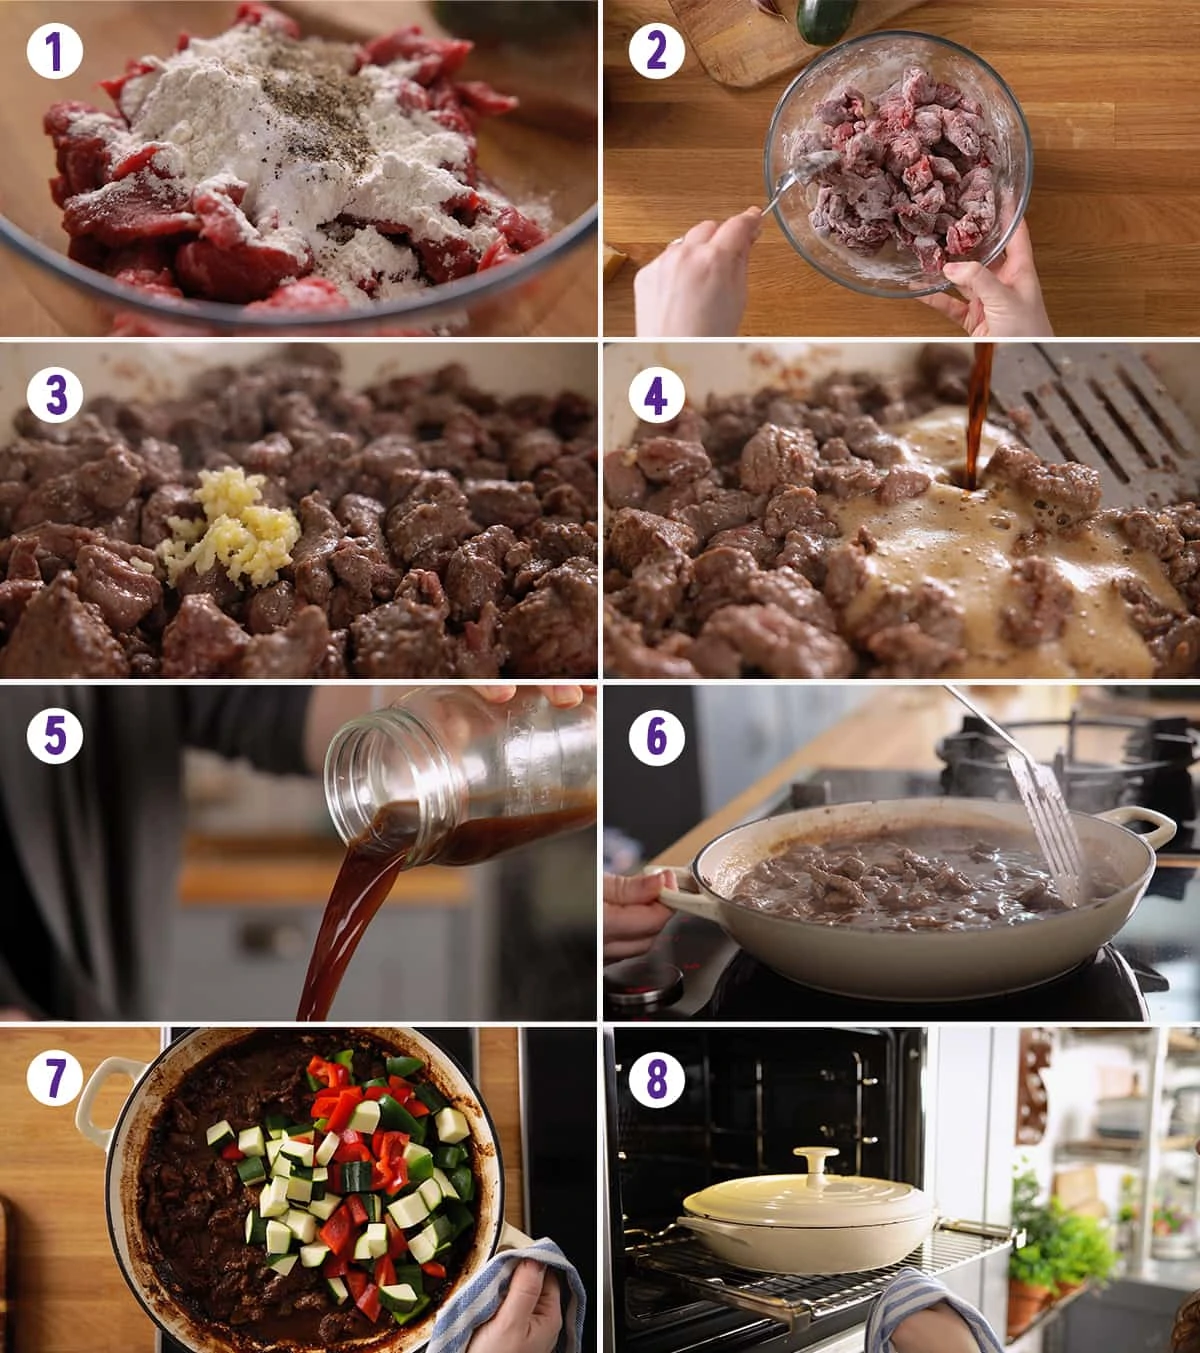 8 image collage showing how to make summer beef casserole